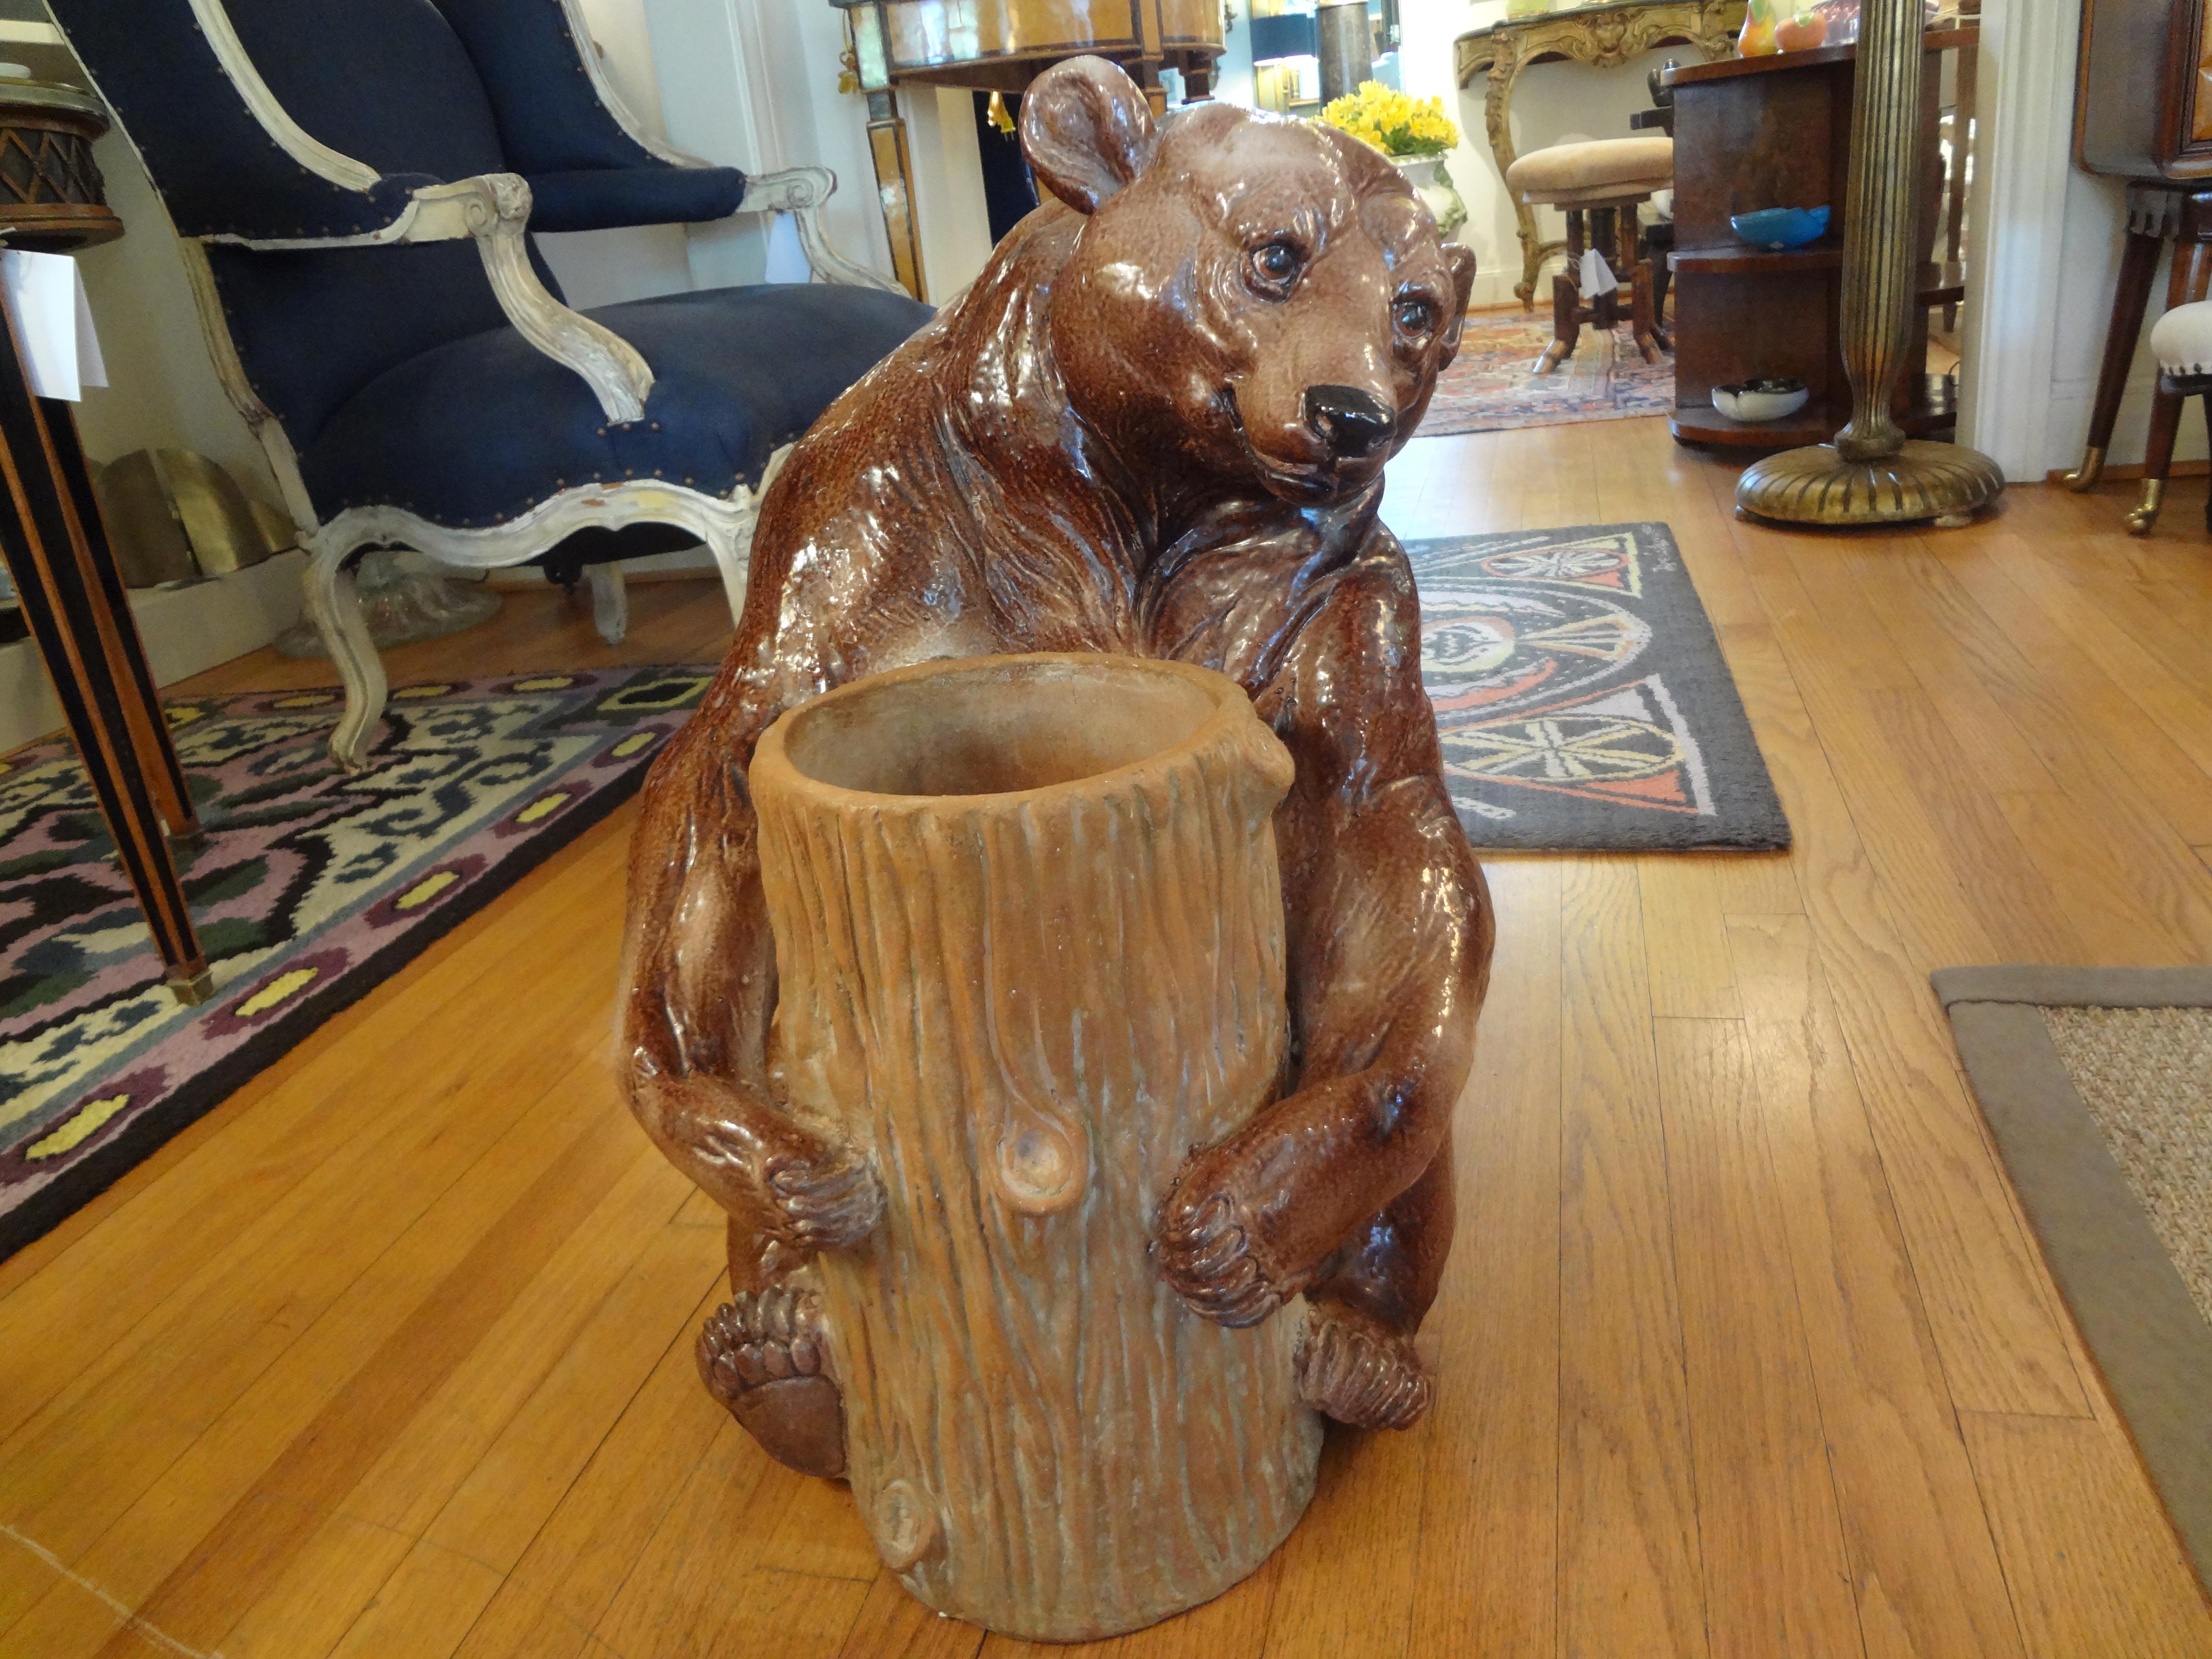 Unusual Italian glazed pottery or Majolica umbrella stand featuring a brown bear hugging a log or tree branch. This umbrella stand dates from 1950-1960. This versatile Hollywood Regency piece has a Black Forest look and could also be used as a